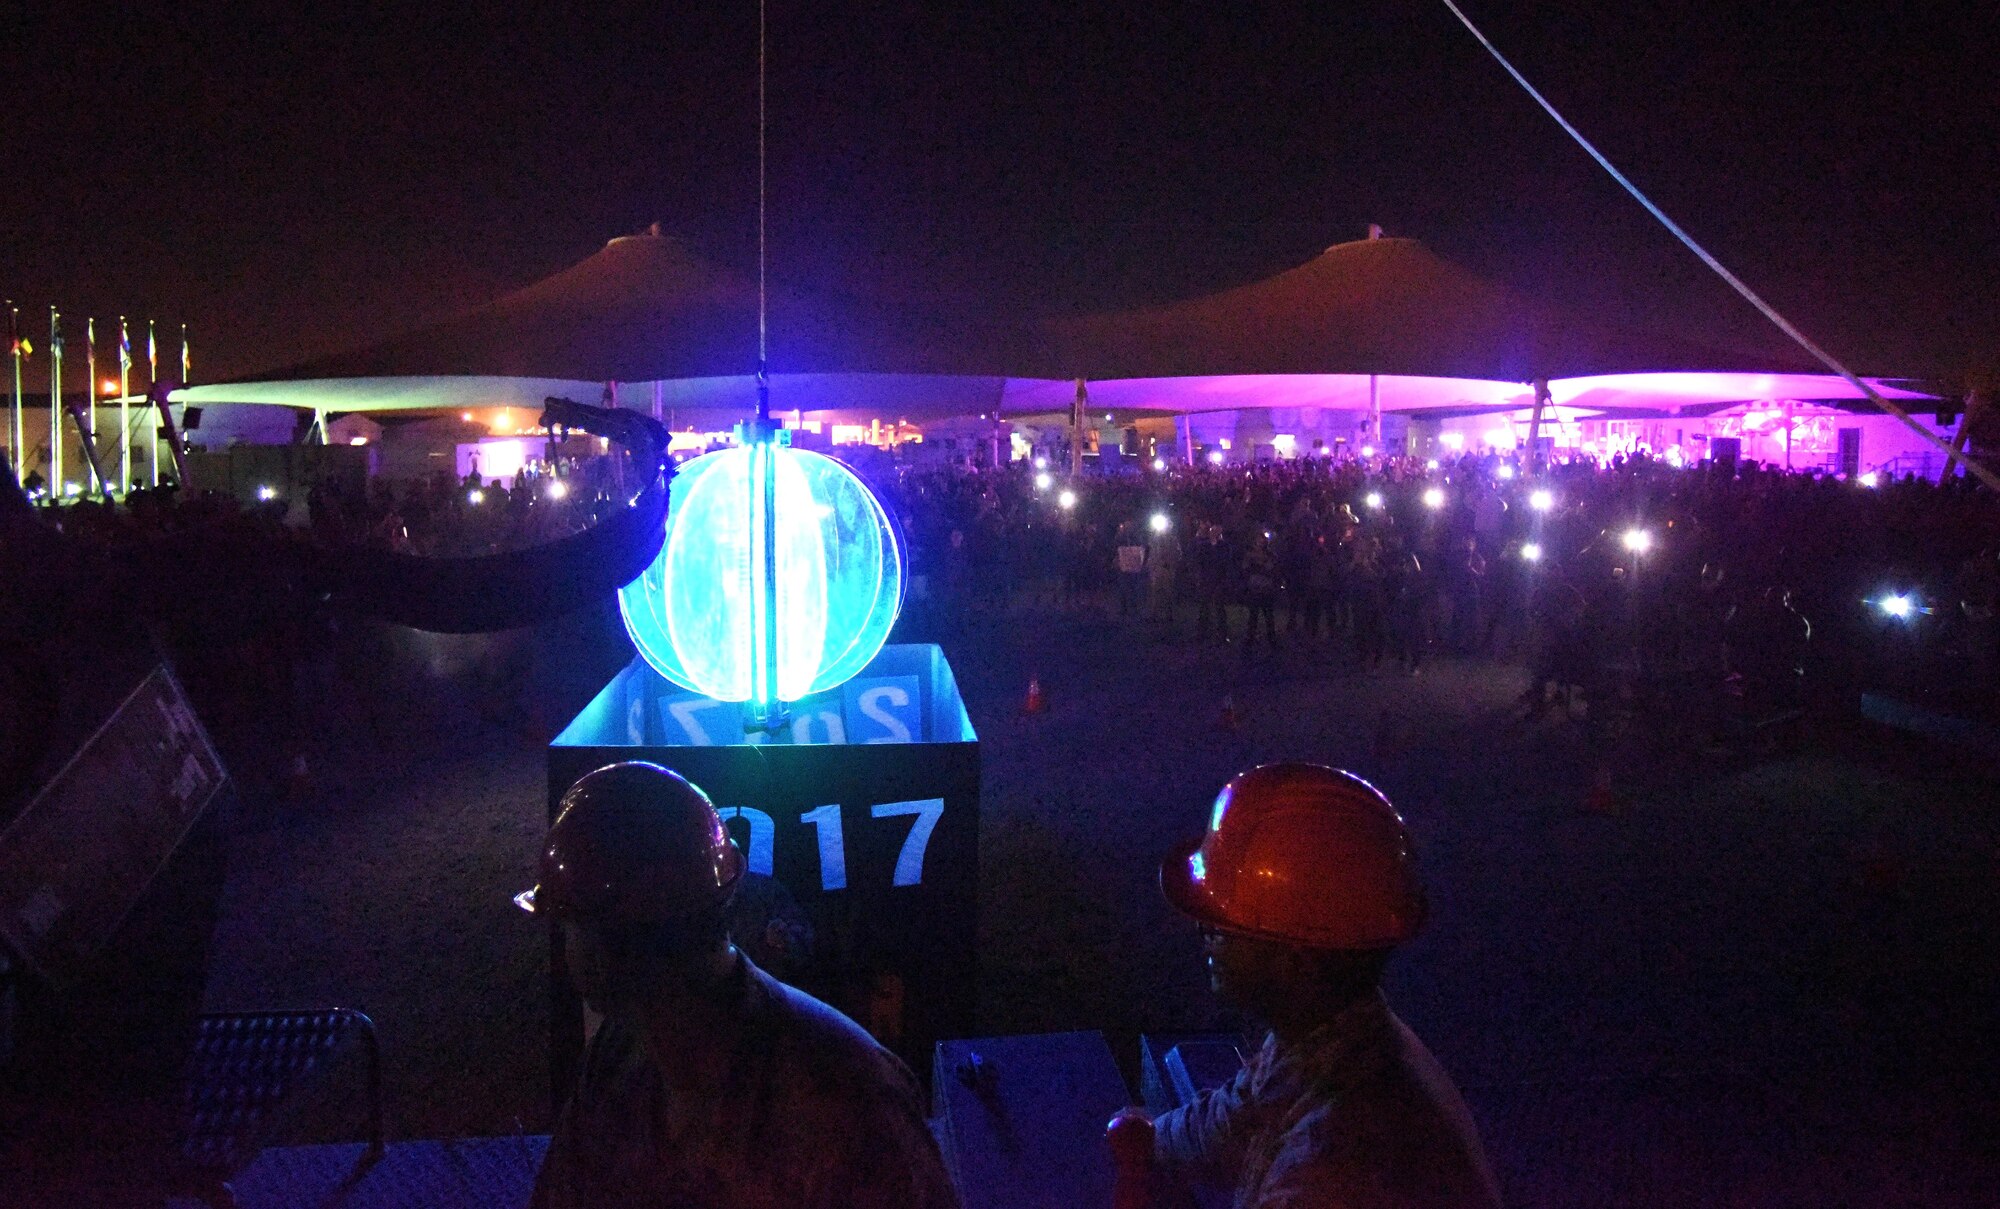 U.S. Air Force Airmen with the 379th Expeditionary Civil Engineer Squadron illuminate Memorial Plaza with a large ball rigged with colorful lights at Al Udeid Air Base, Qatar, Dec. 31, 2016. This ball was repaired by four Airmen with the 379th ECES so they could lower it on New Year’s Eve. (U.S. Air Force photo by Senior Airman Cynthia A. Innocenti)